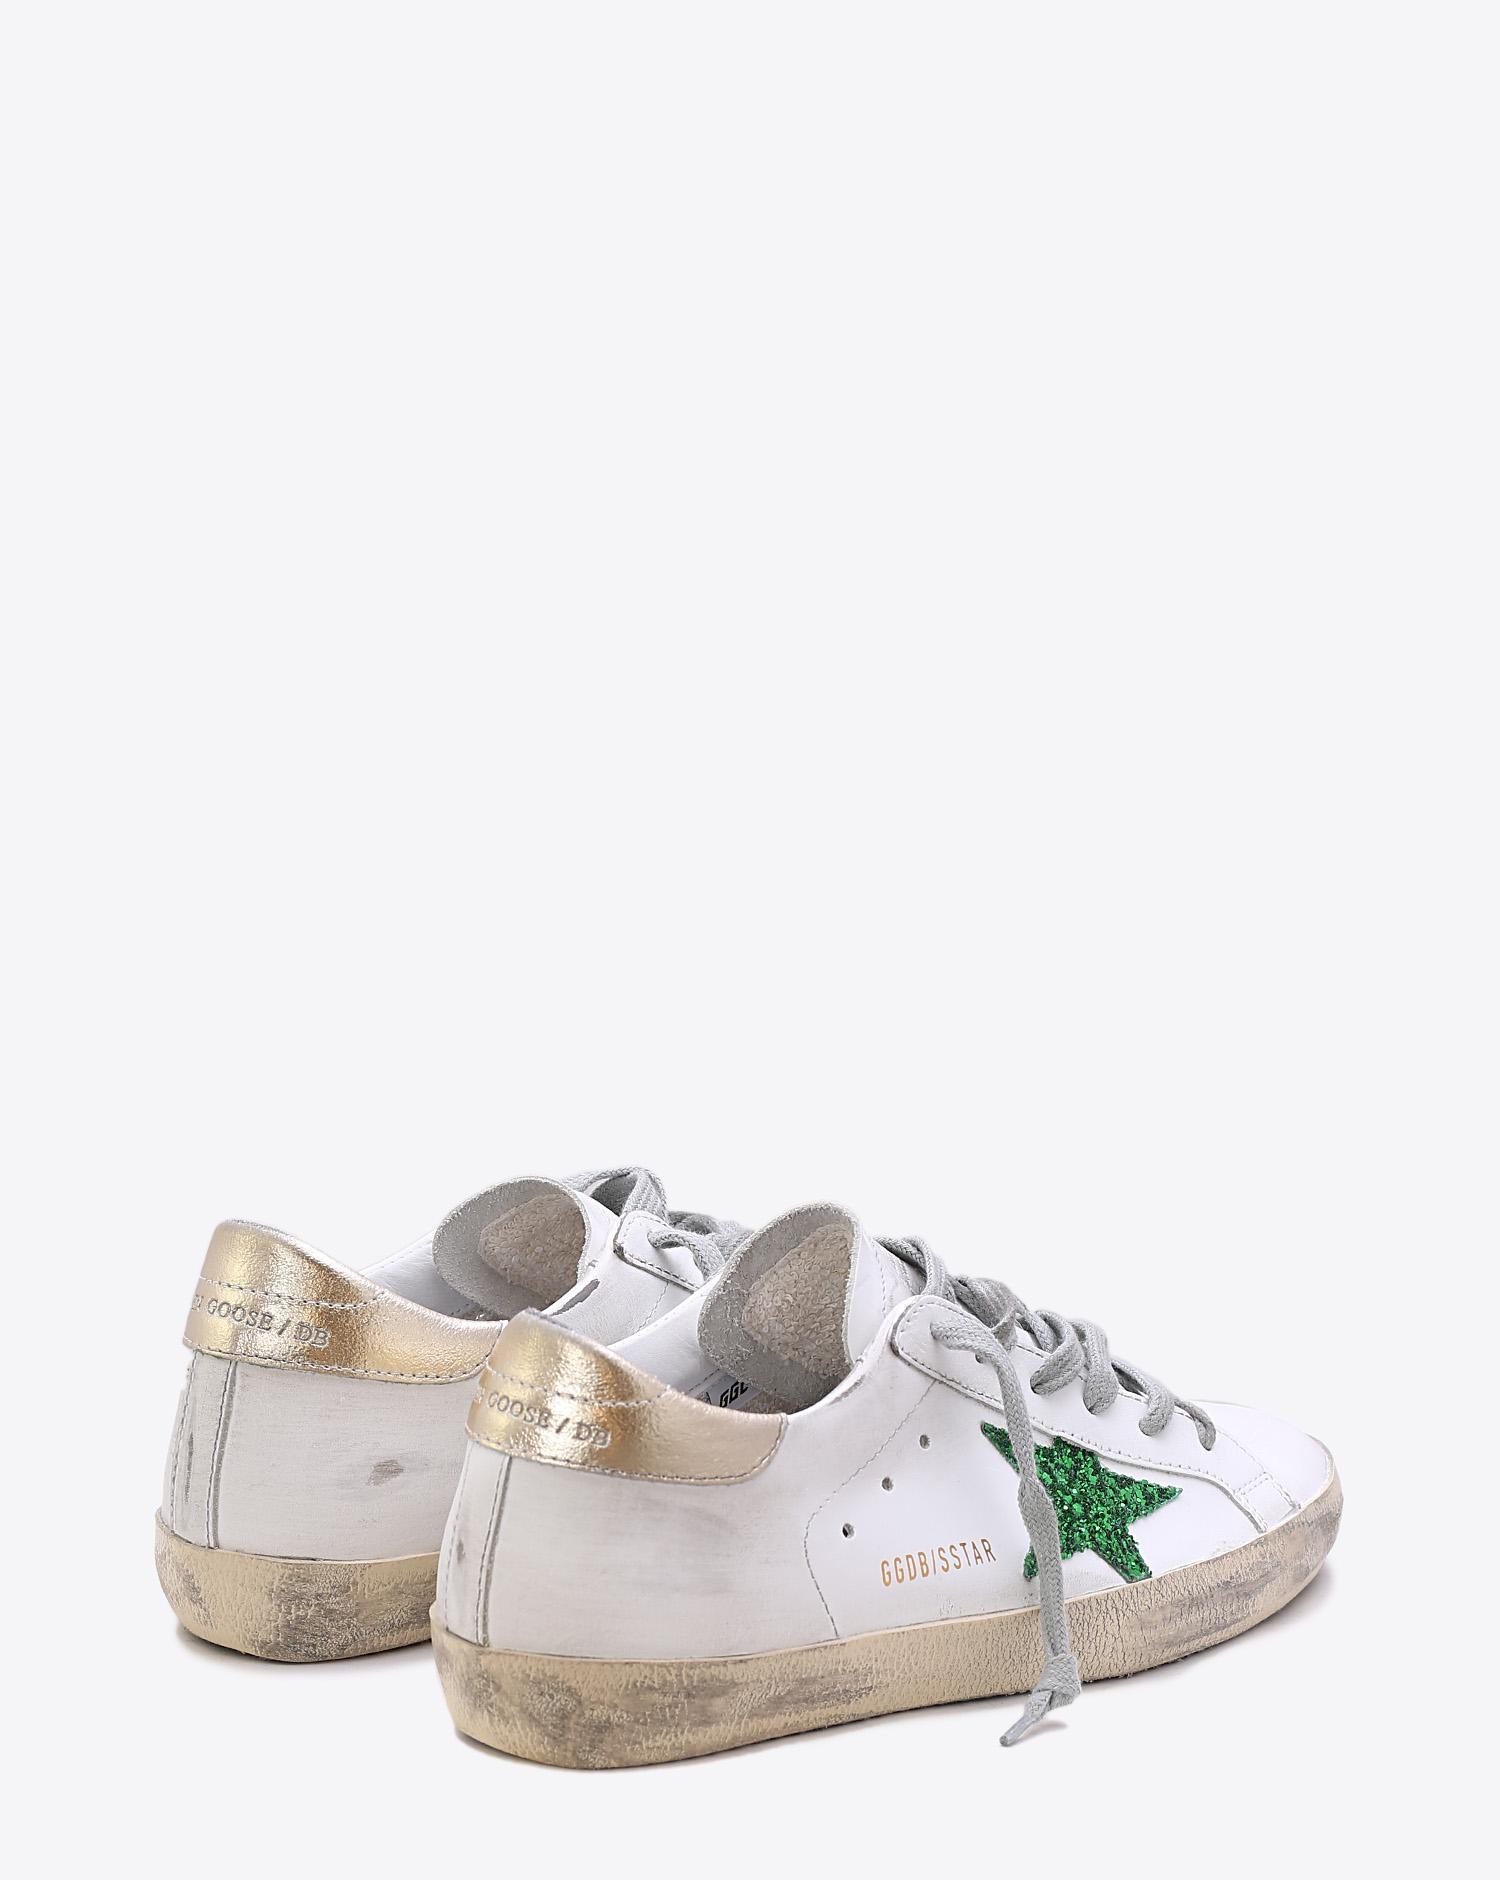 Golden Goose Woman Collection Sneakers Superstar White Leather Green Glitter  